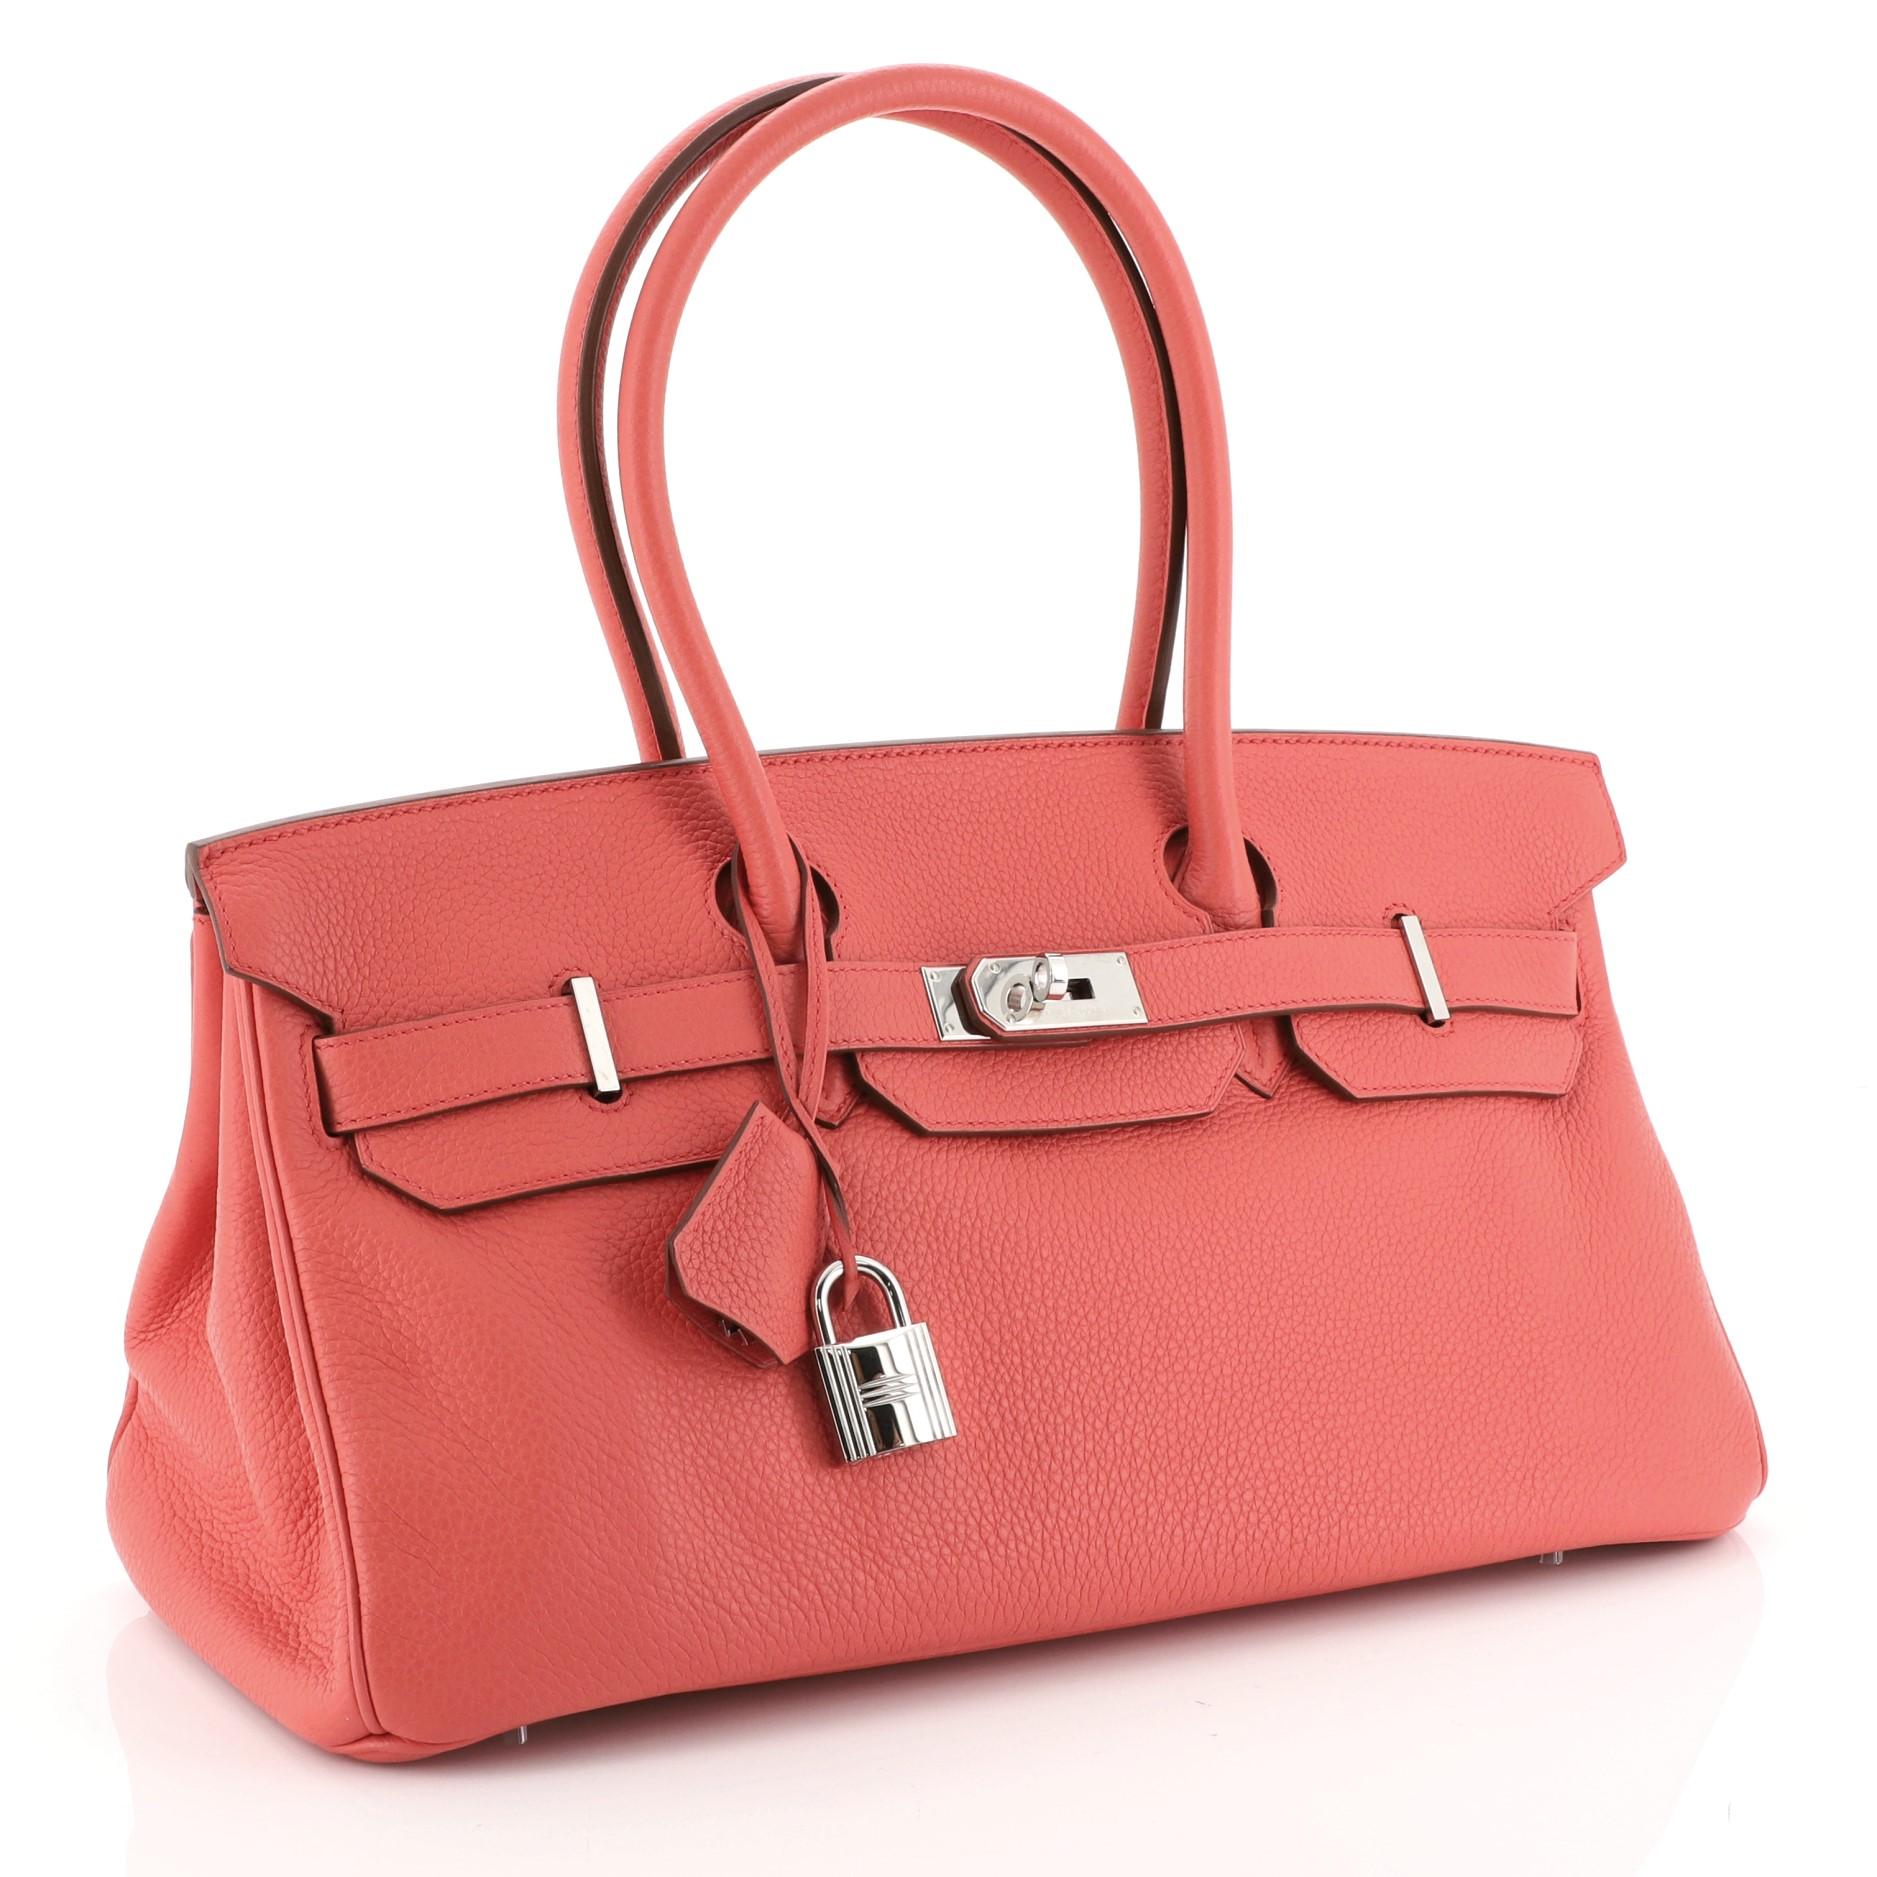 This Hermes Birkin JPG Handbag Bougainvillea Clemence with Palladium Hardware 42, crafted in Bougainvillea red Clemence leather, features dual rolled handles, frontal flap, and palladium hardware. Its turn-lock closure opens to a Bougainvillea red